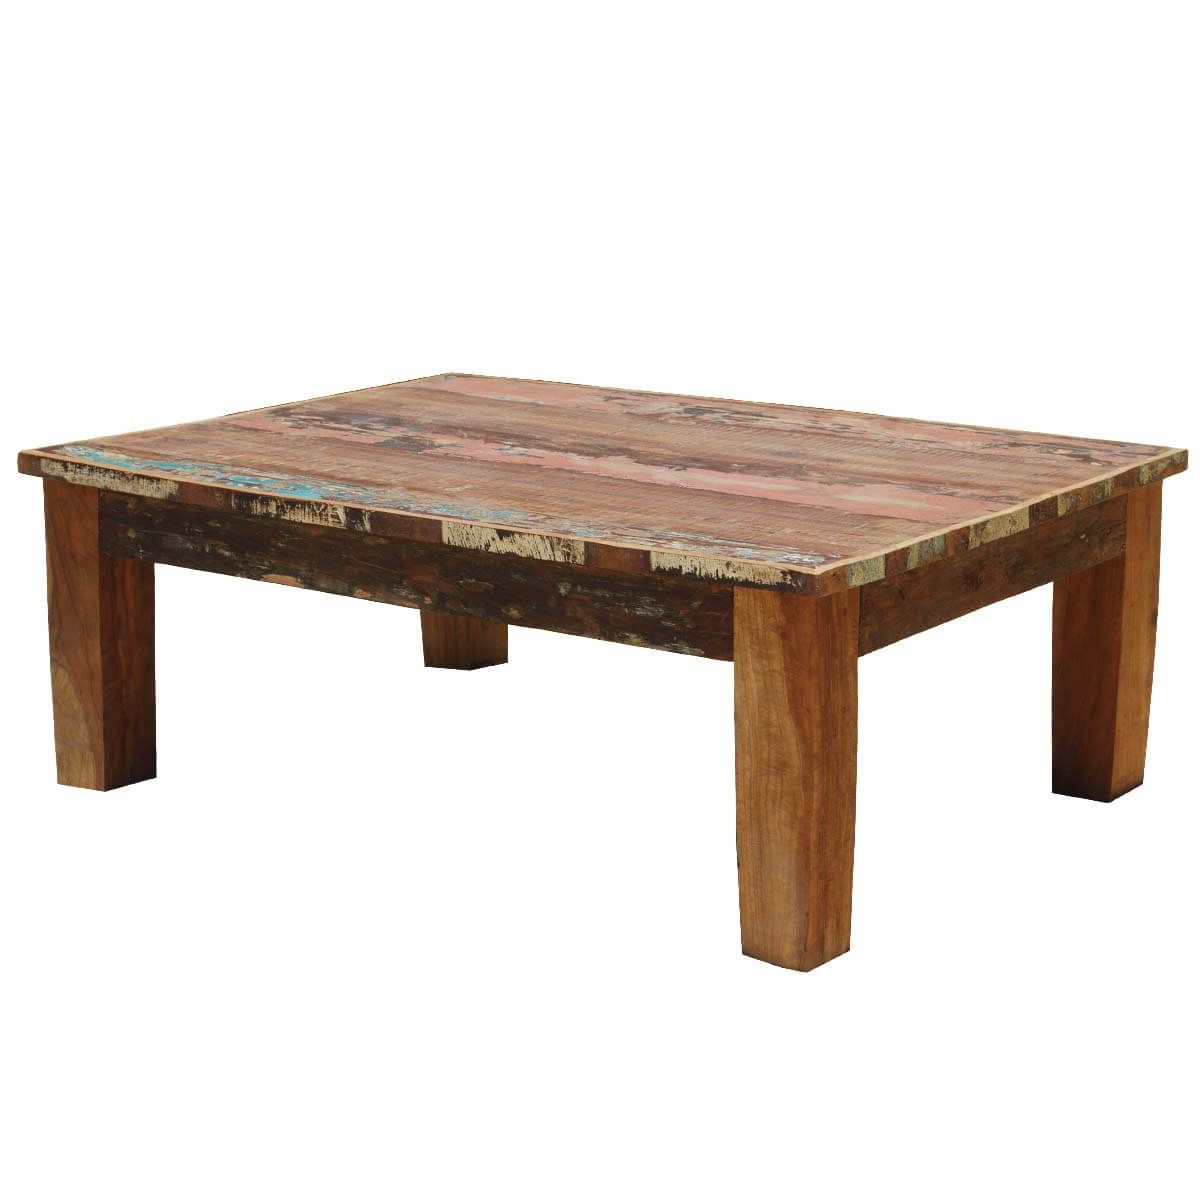 Culbertson Rustic Reclaimed Wood Rectangle Coffee Table Intended For Trendy Barnwood Coffee Tables (View 12 of 20)